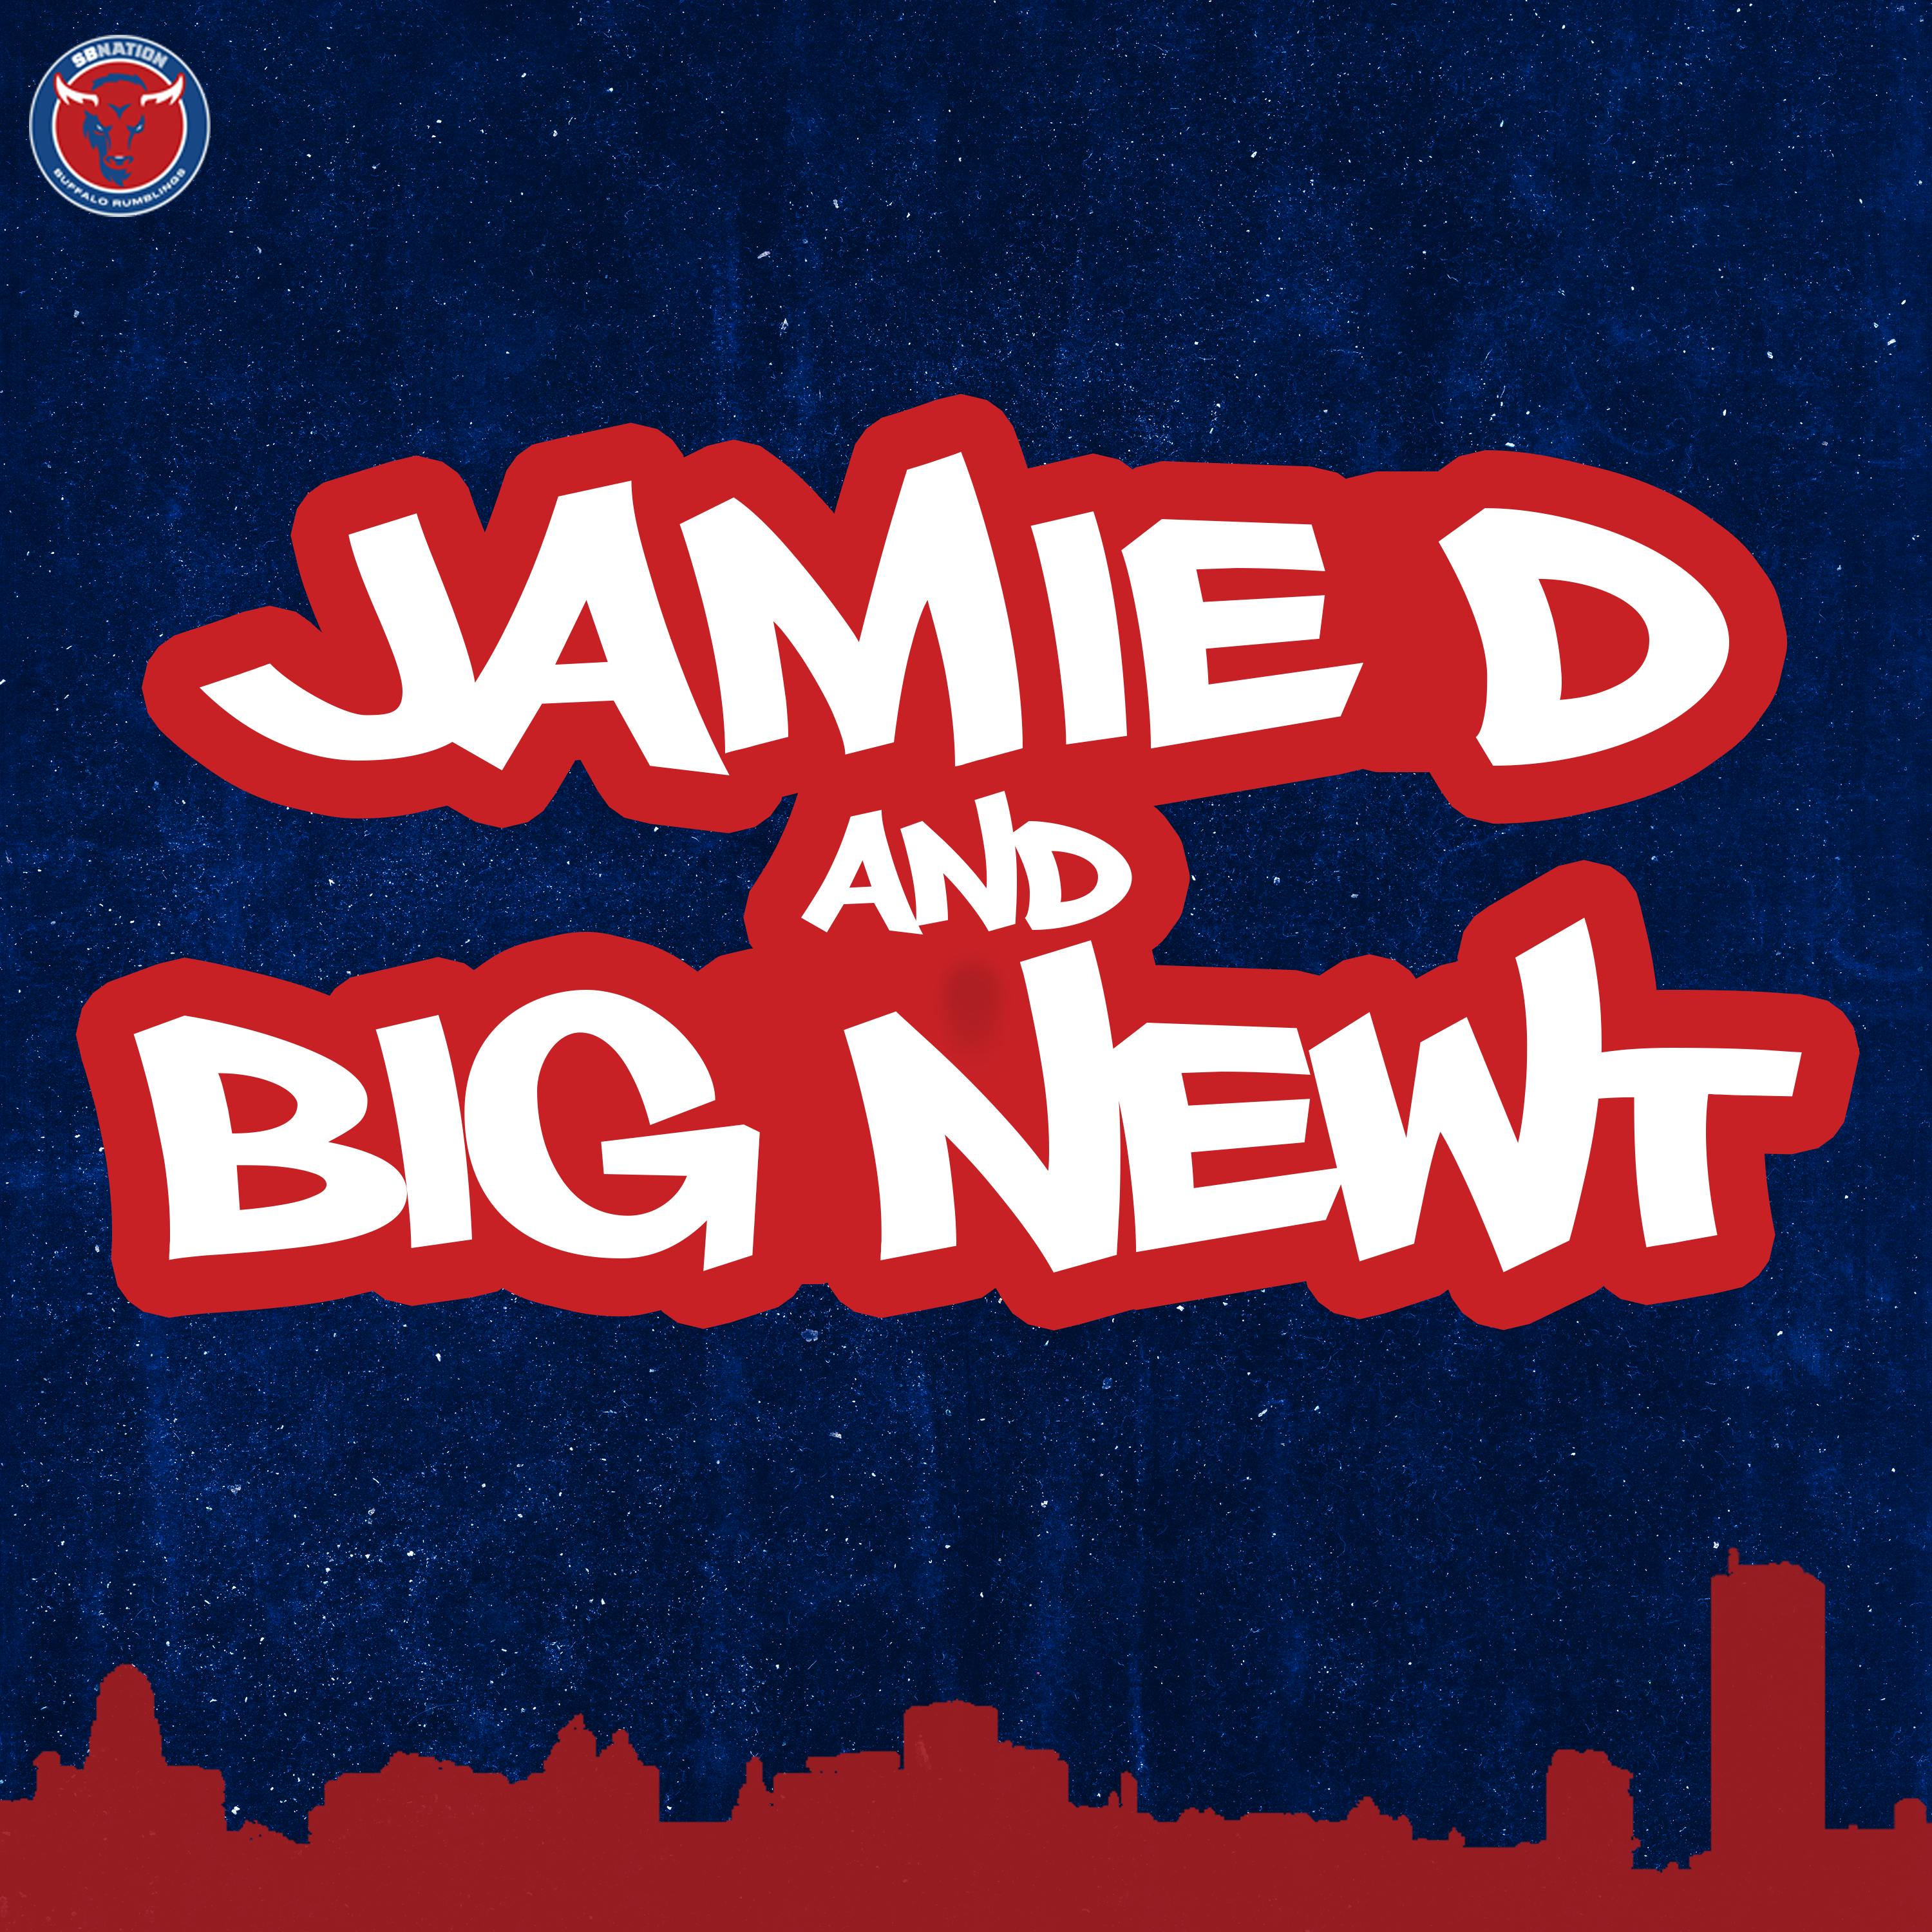 Jamie D & Big Newt: The preseason game and the Hall of Fame